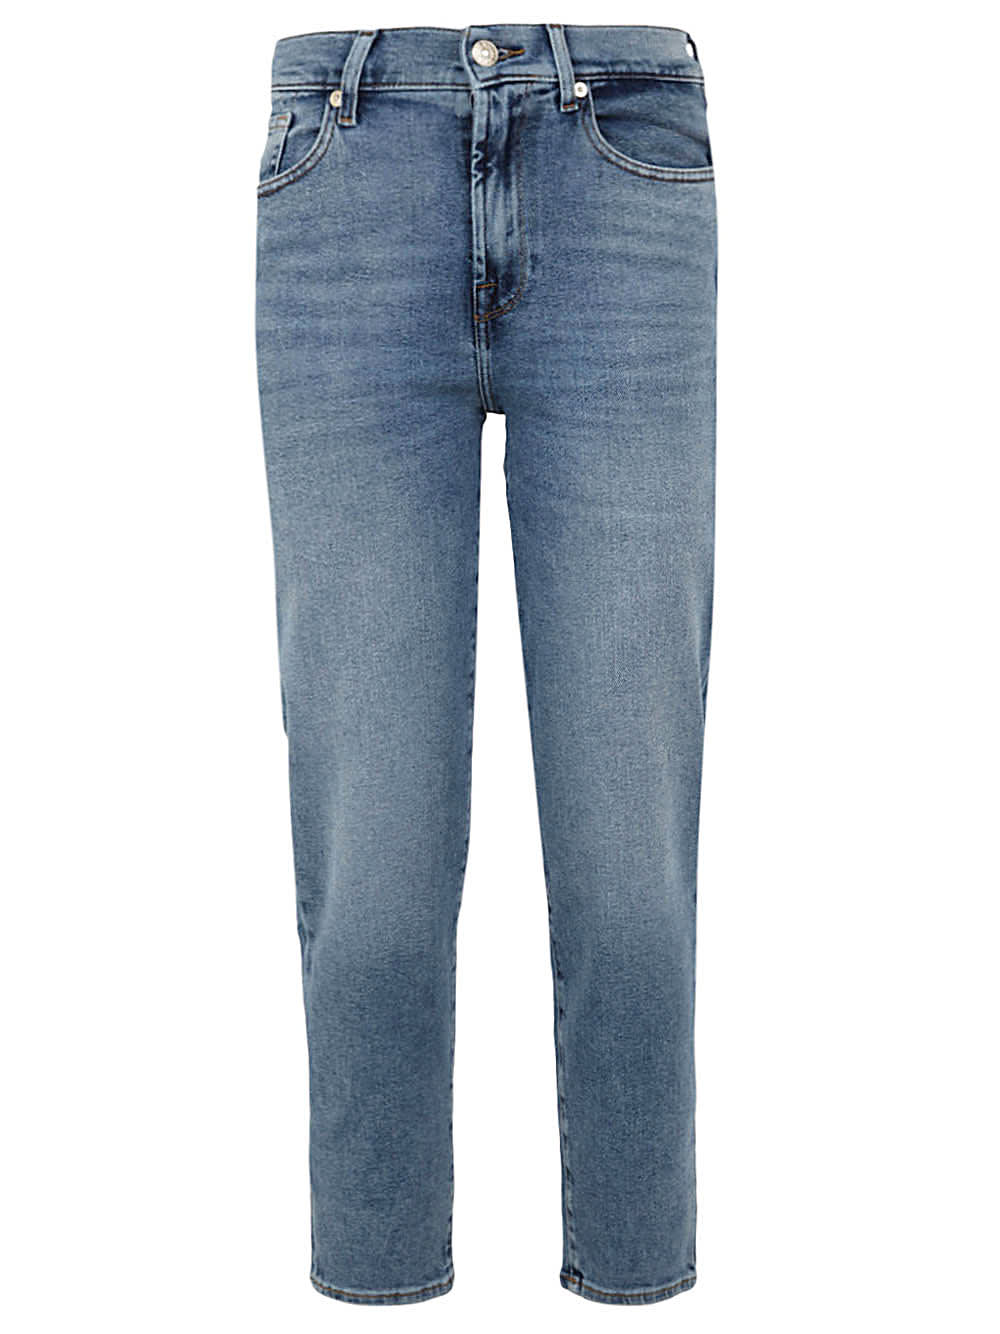 7 For All Mankind Malia Luxe Vintage Never Better Jeans